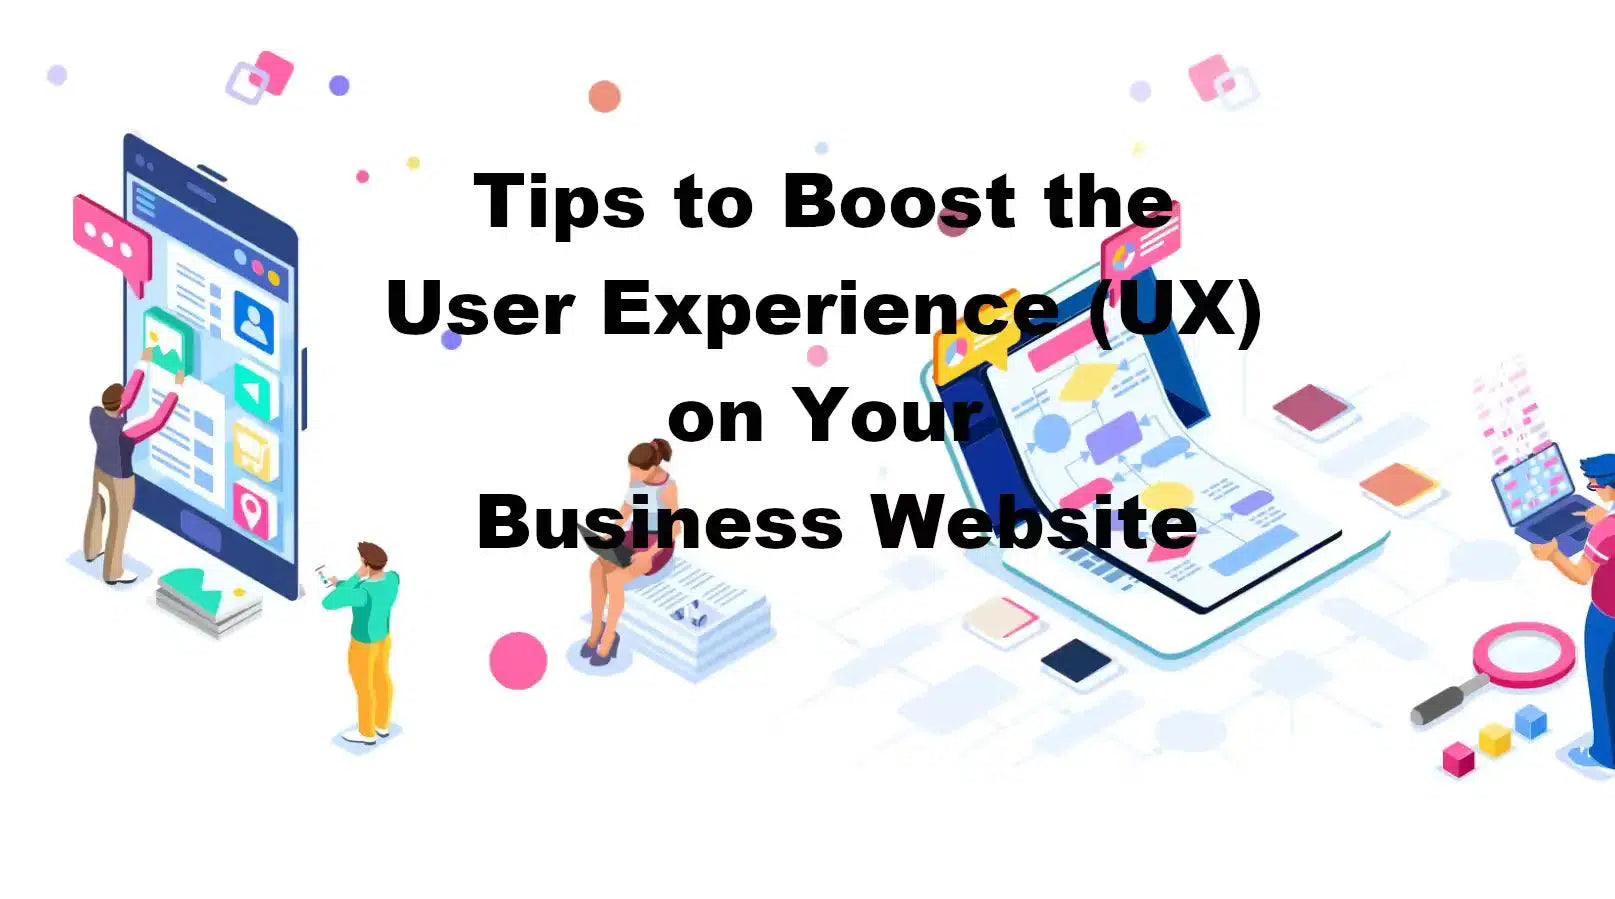 Tips to Boost the User Experience (UX) on Your Business Website